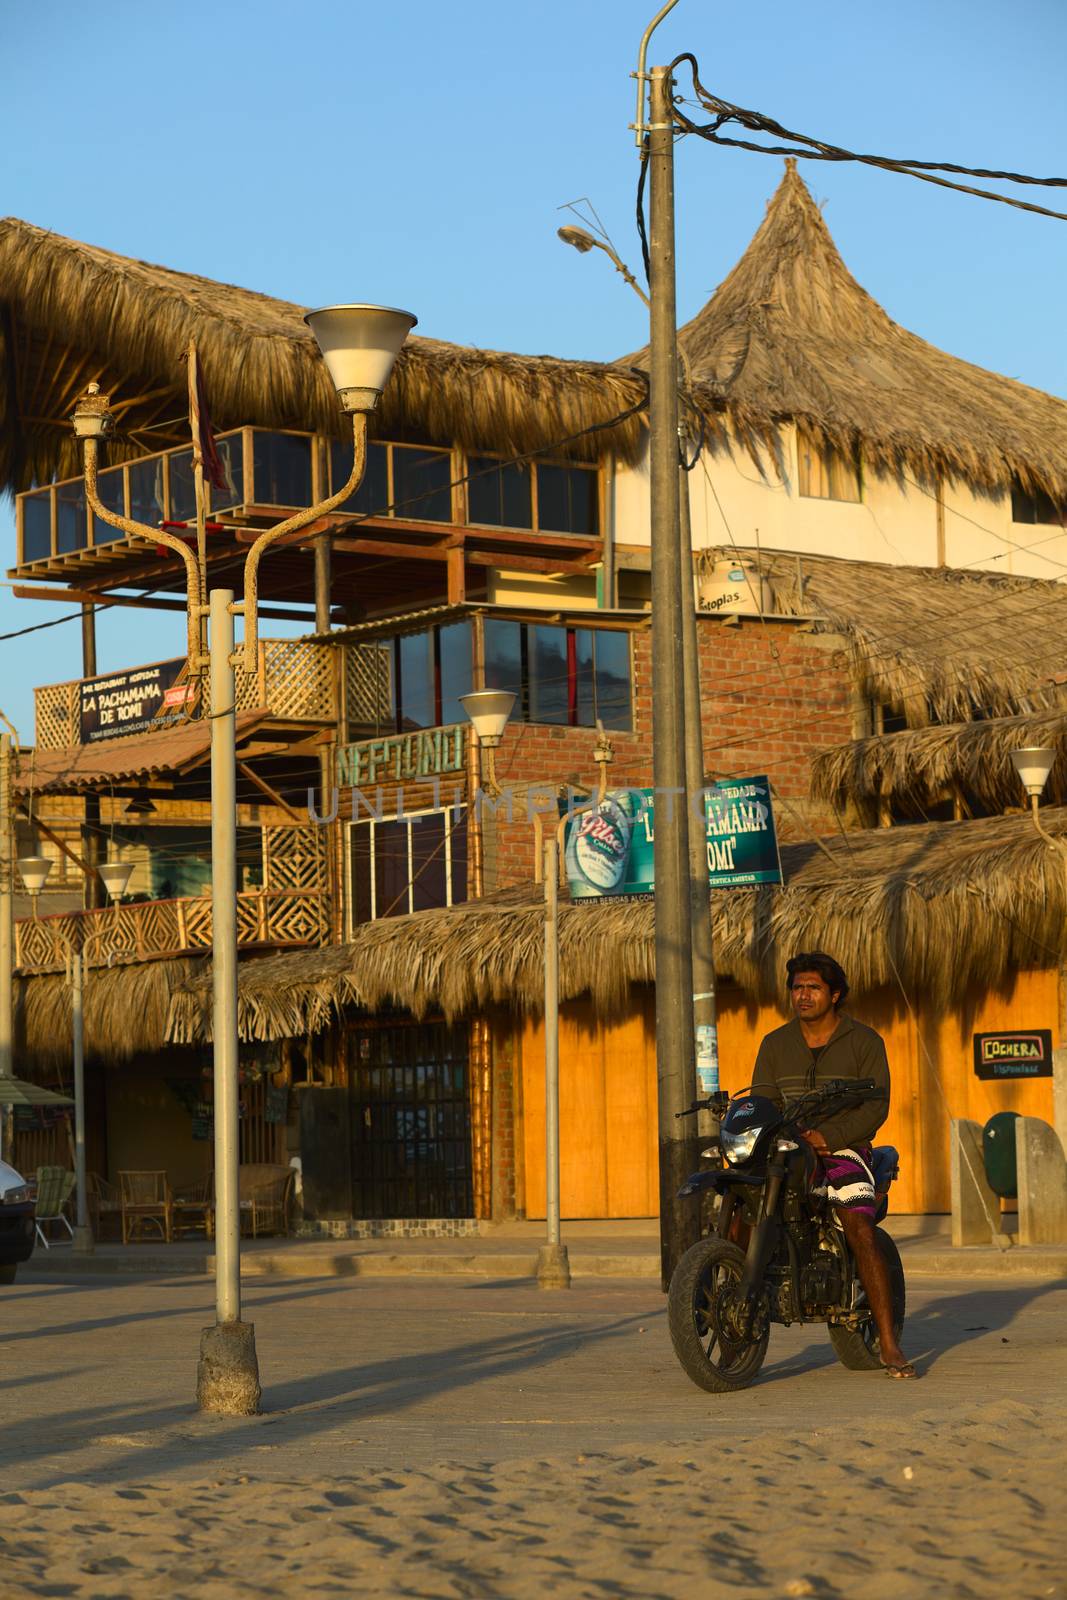 MANCORA, PERU - AUGUST 20, 2013: Unidentified young man on motorbike watching the setting sun and the beach on August 20, 2013 in Mancora, Peru. The small town of Mancora in Northern Peru is known for its sandy beaches and is popular with Peruvian and foreign tourists.